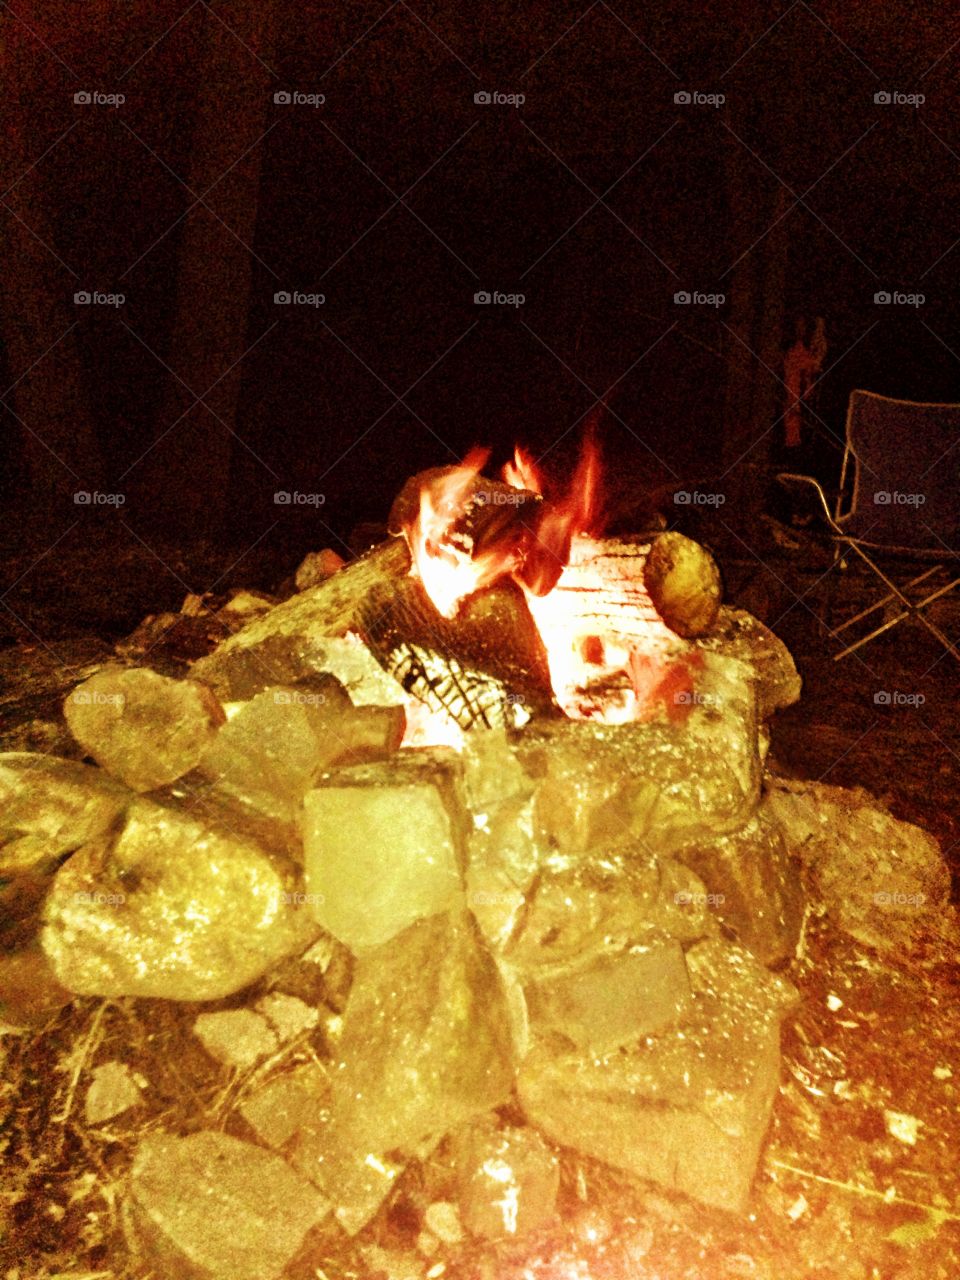 #fire #relax #camp #countrylife #mountainlife 